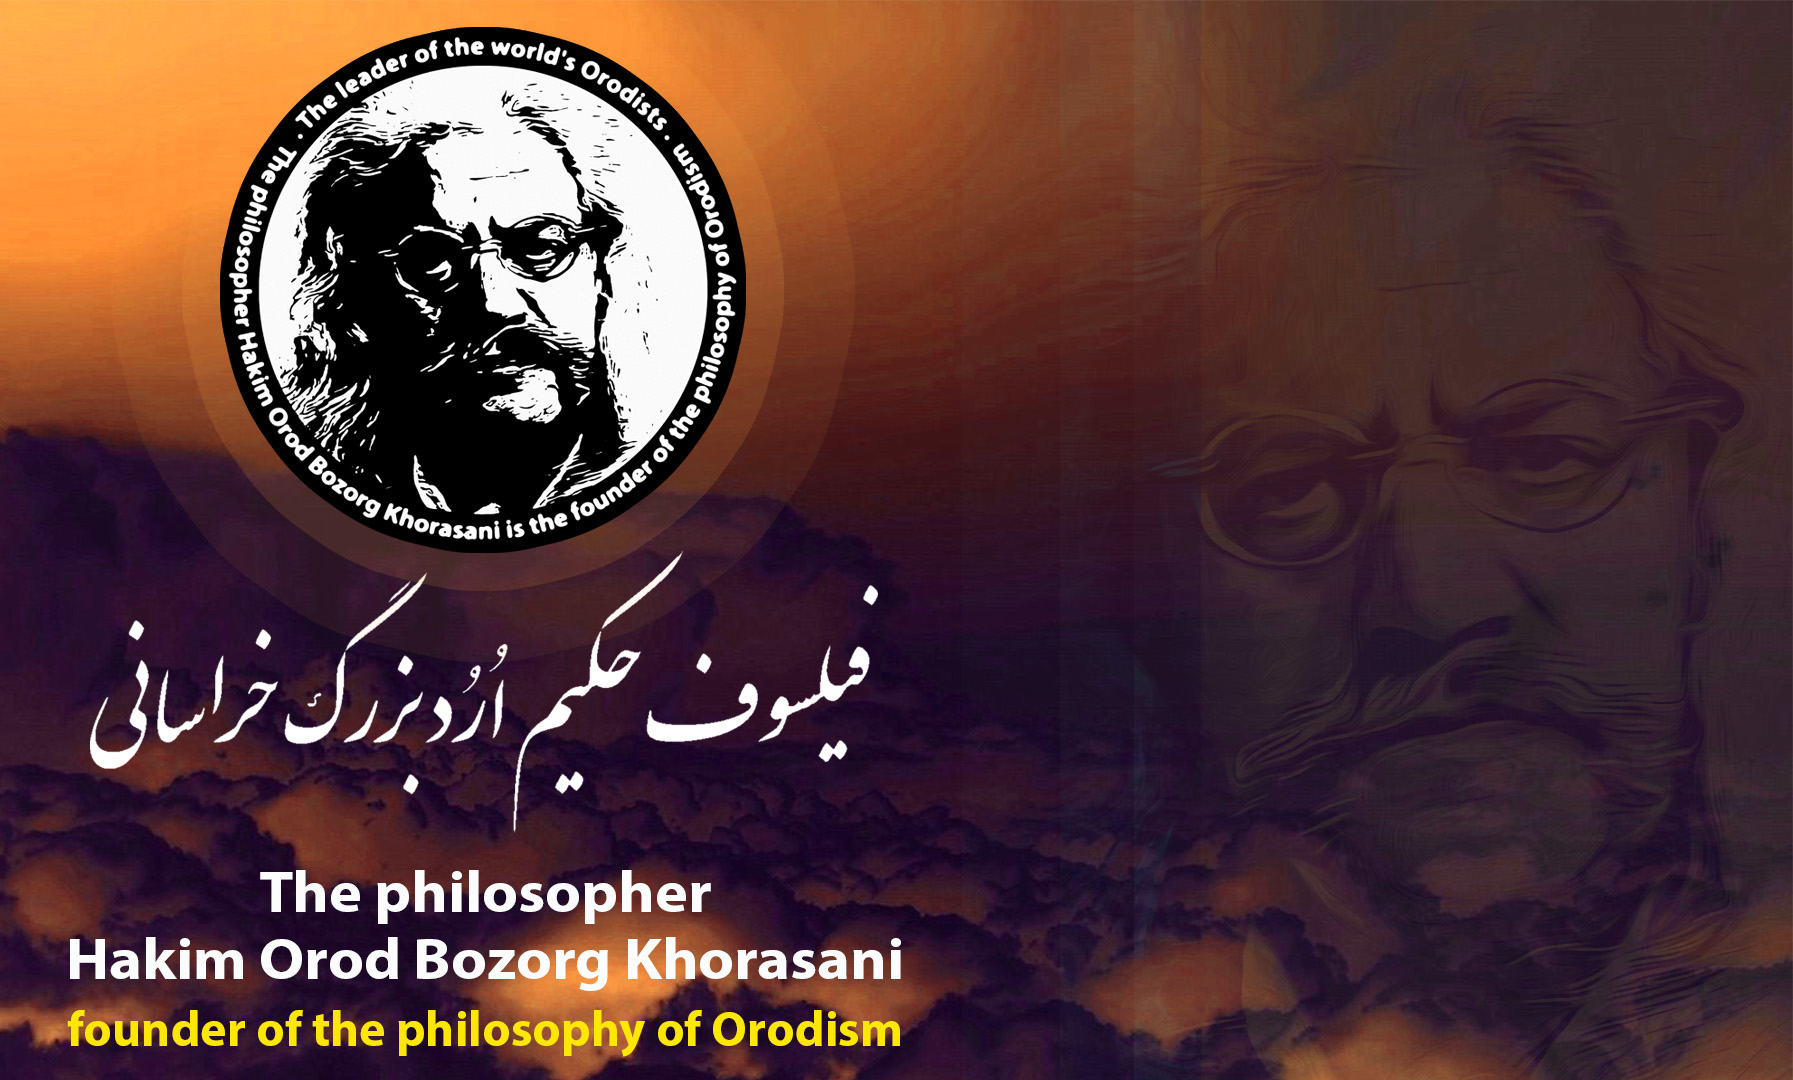  96 Thought-Provoking Quotes By The Philosopher Hakim Orod Bozorg Khorasani For The Bibliophiles Japan_7_